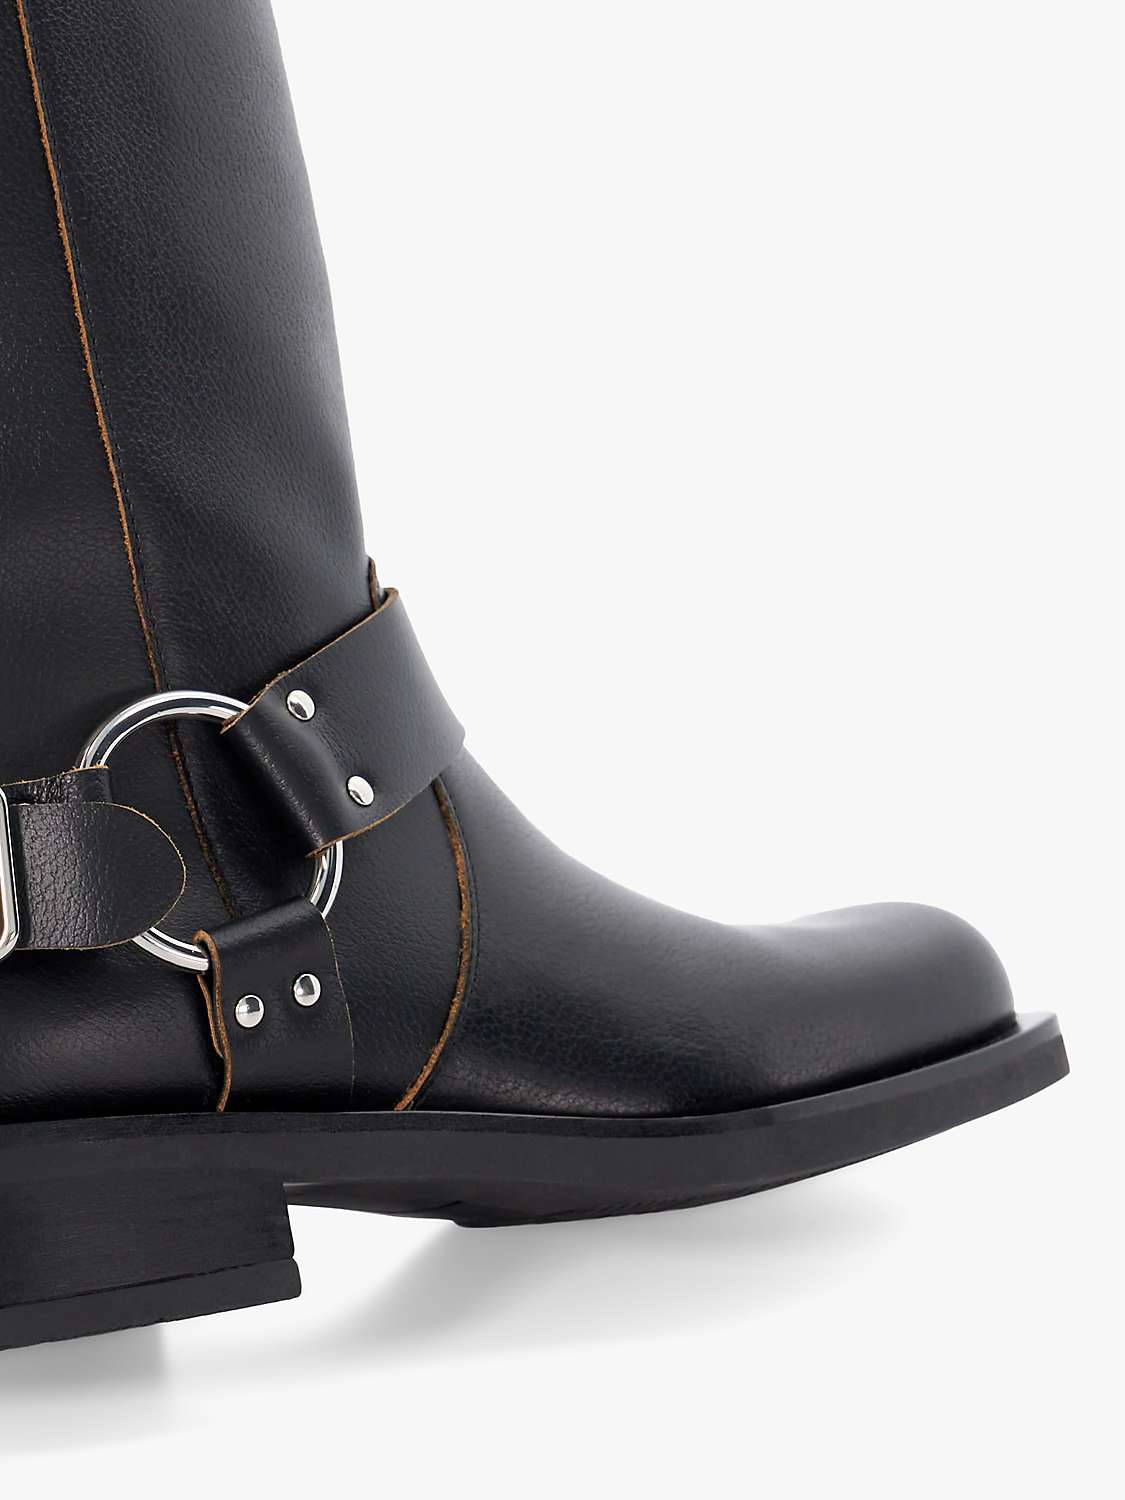 Buy Dune Totoe Leather Buckle Detail Ankle Boots, Black Online at johnlewis.com